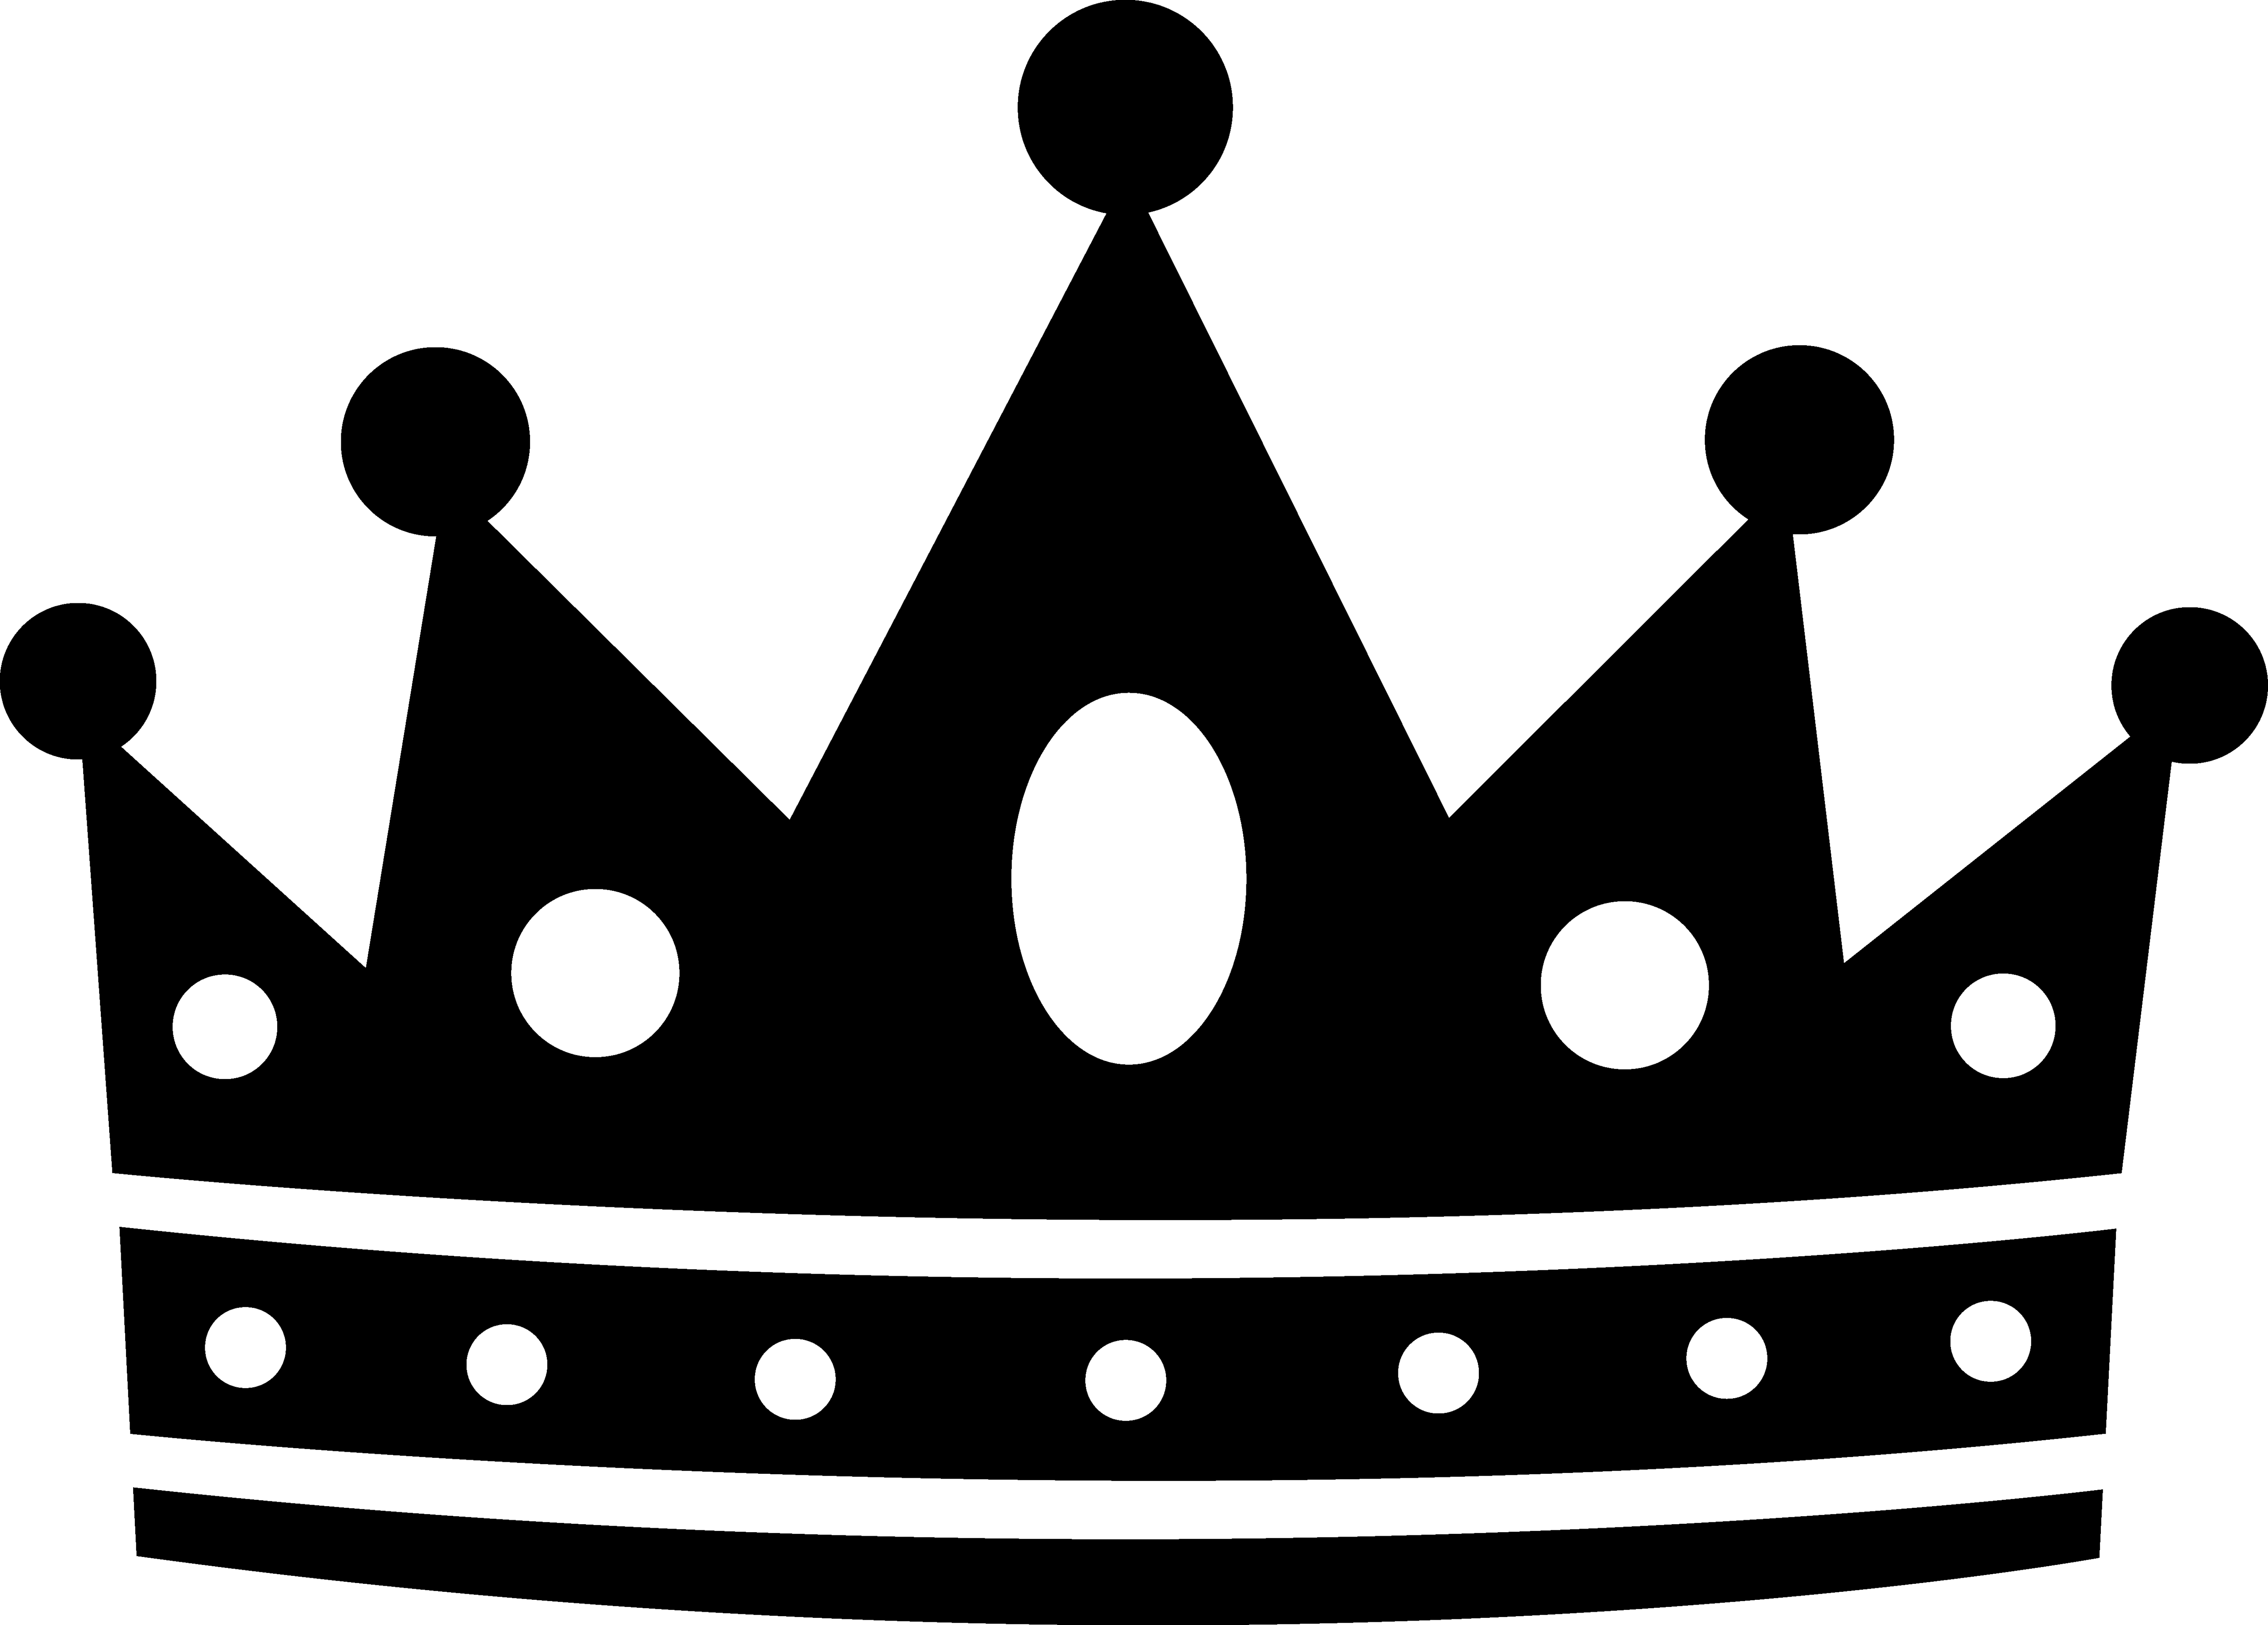 Crown Clip Art Black And Whit